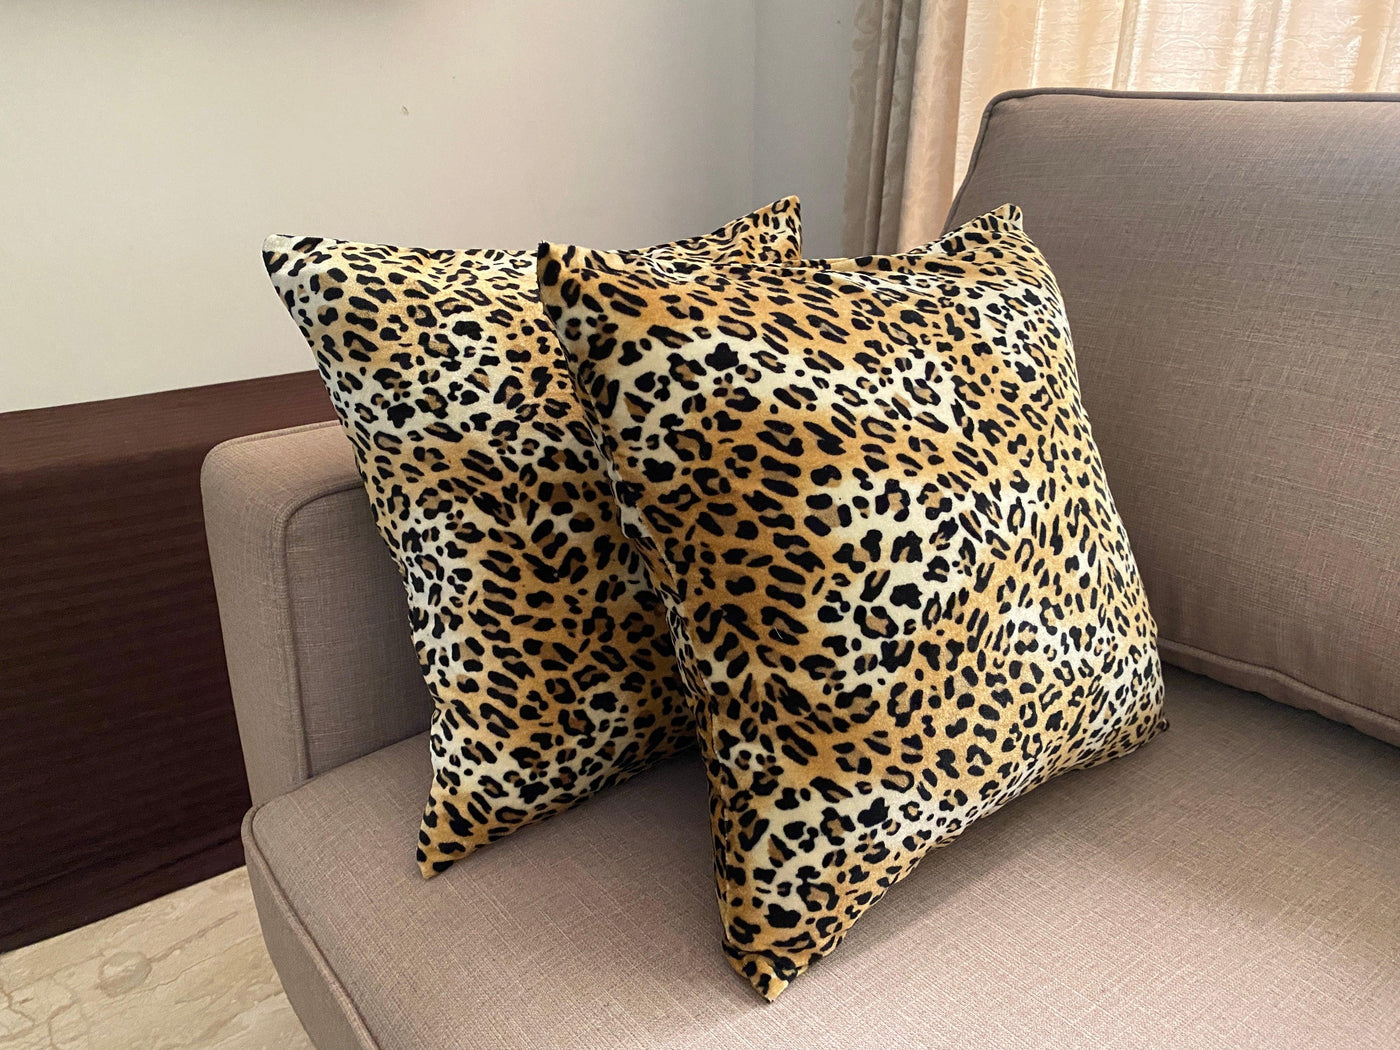 Silvr Bear leopard cushion cover adds bold style to your sofa